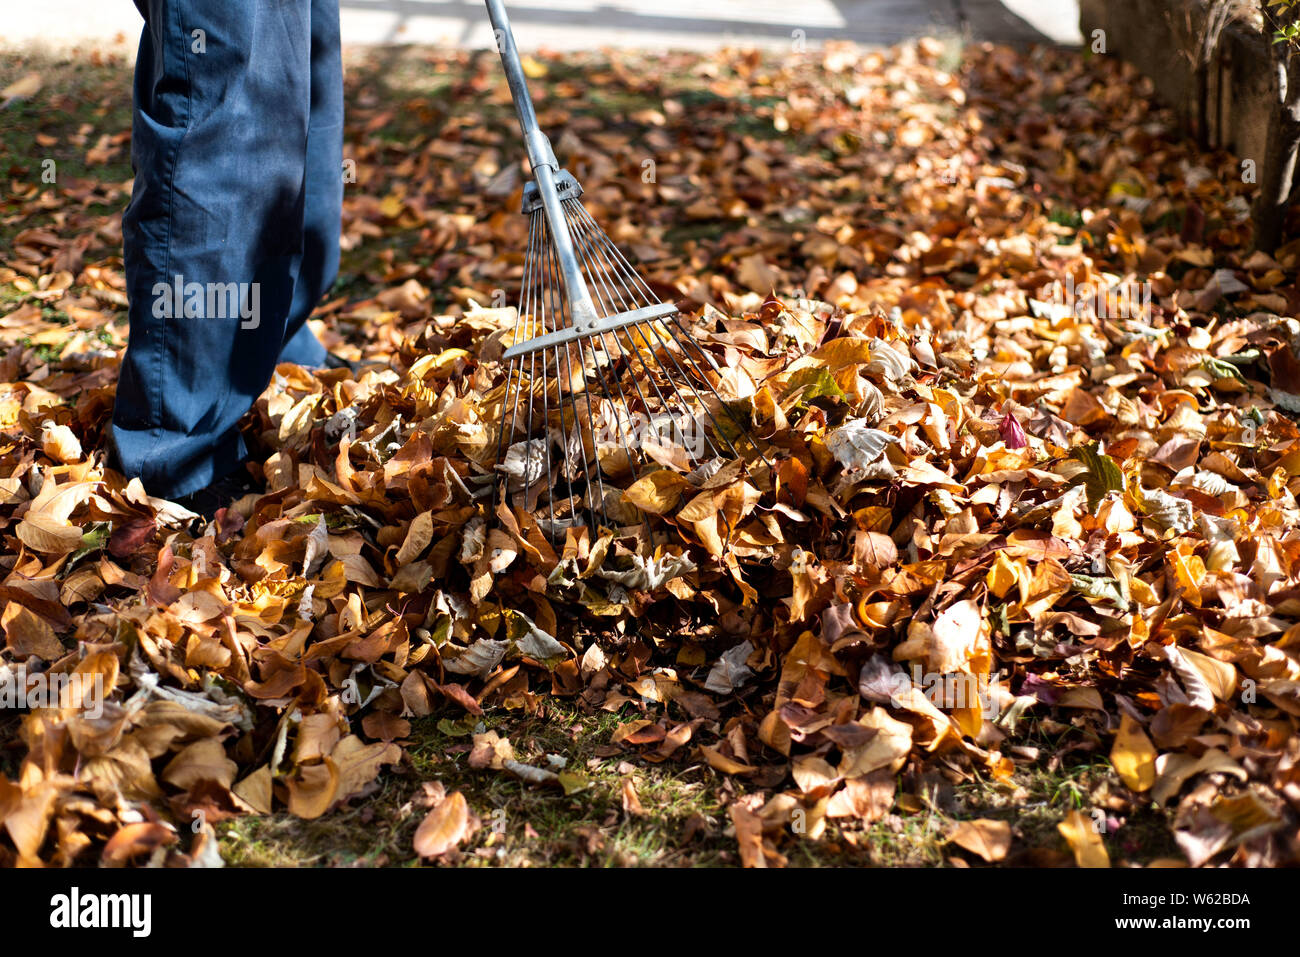 Man cleaning fallen autumn leaves in the backyard Stock Photo